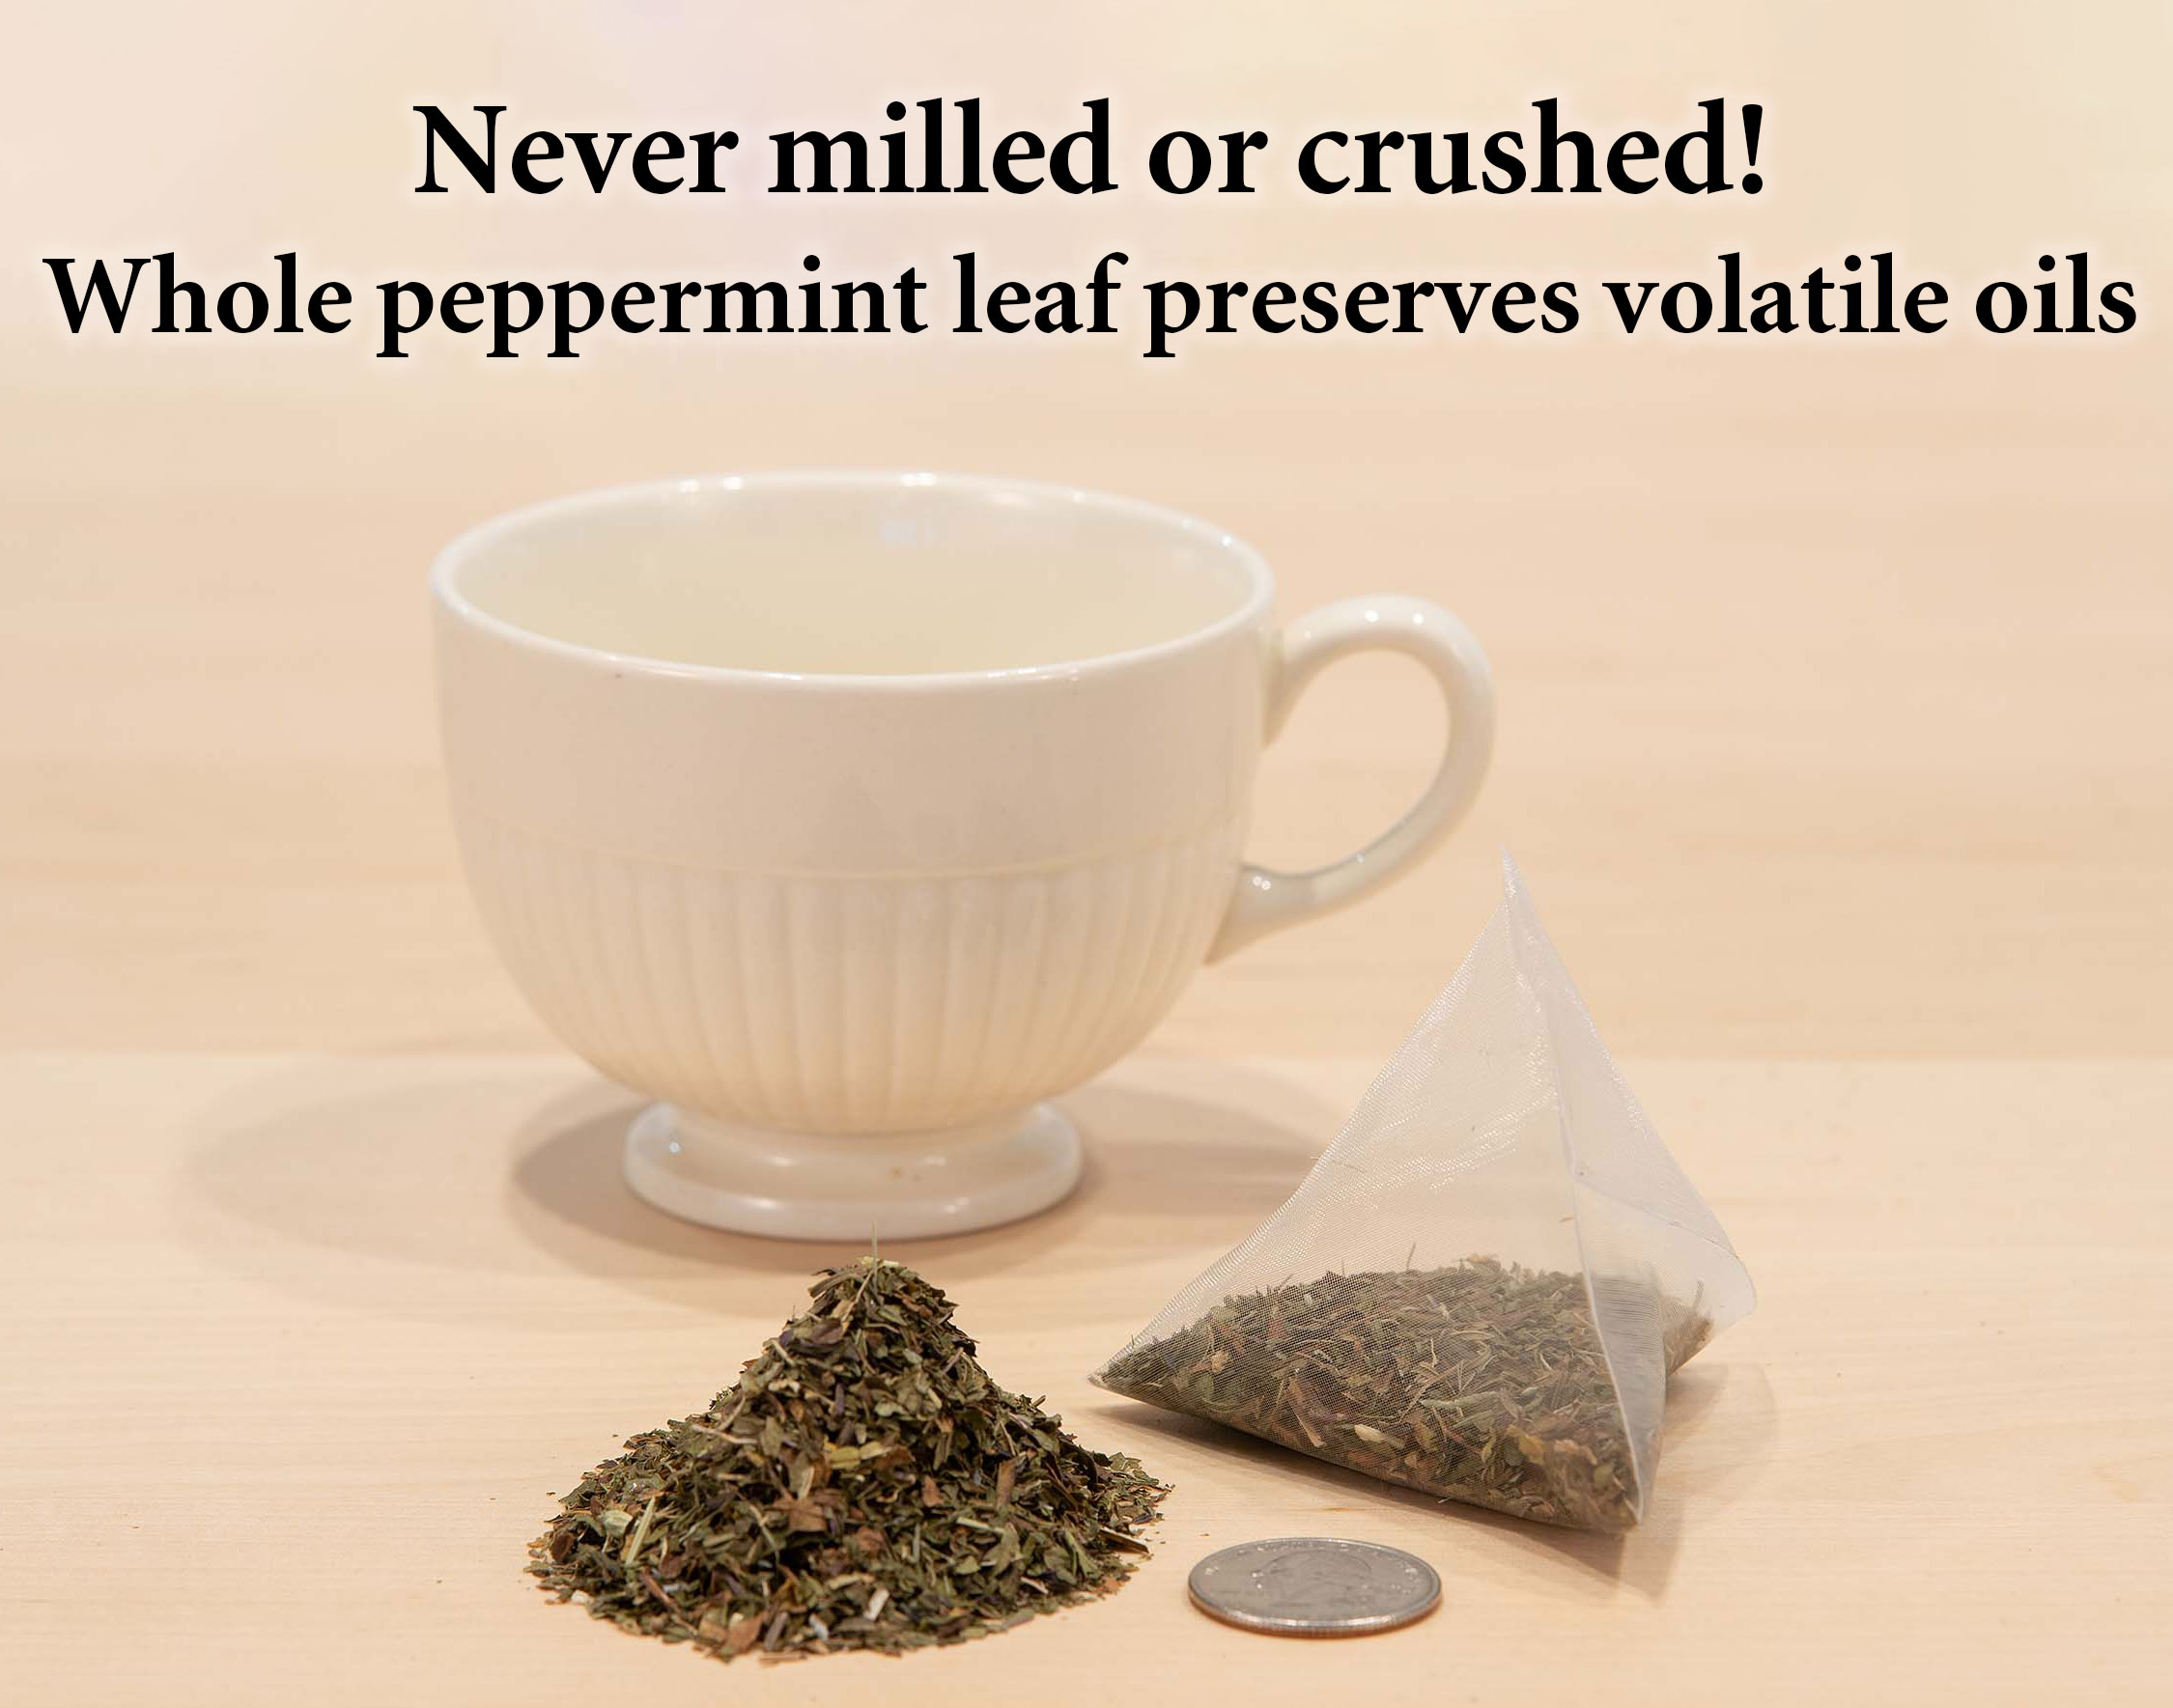 Peppermint Tummy TEABAGS POUCH